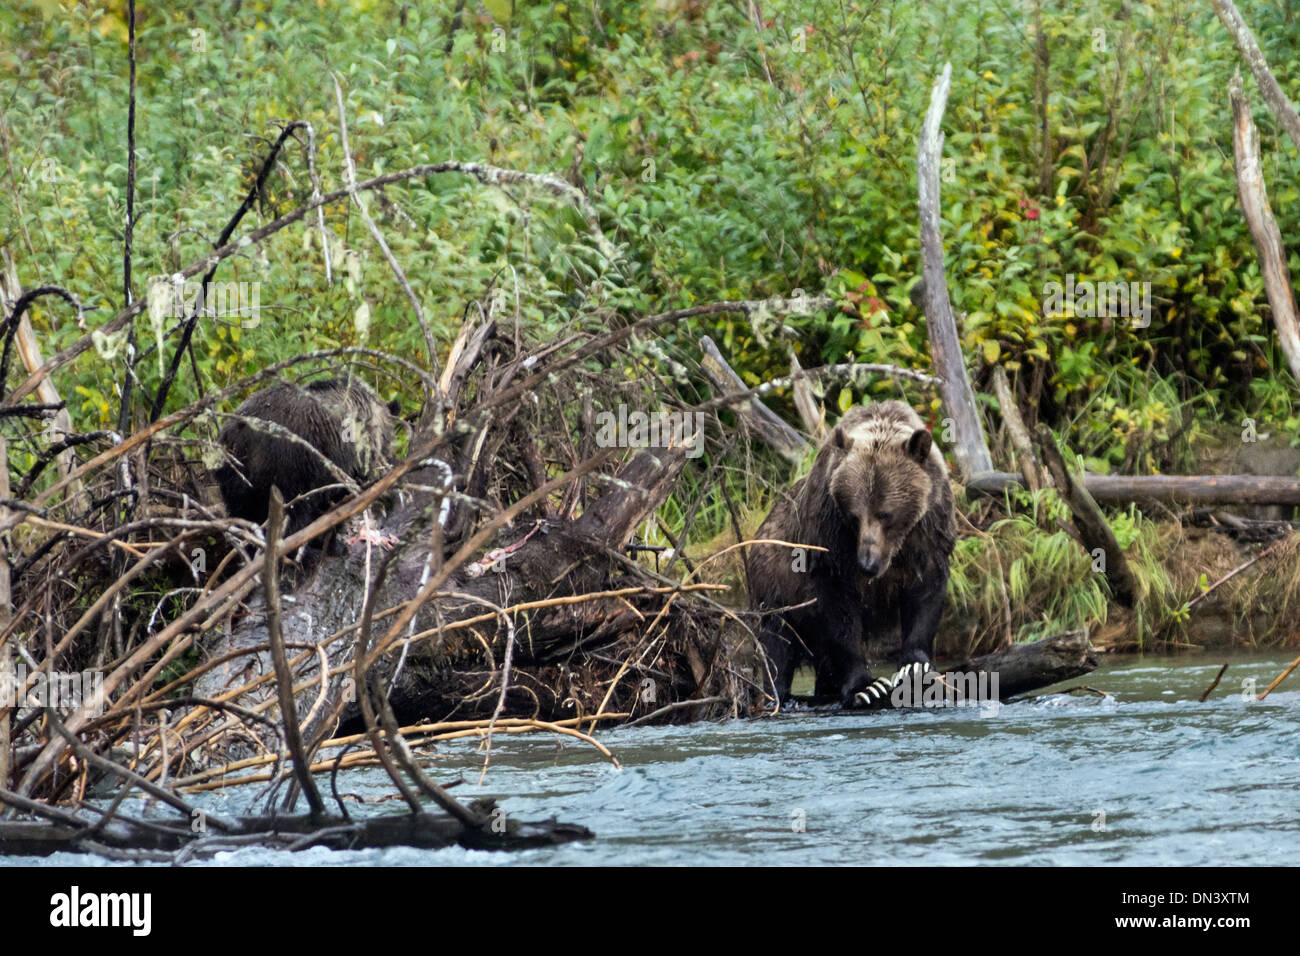 Mother grizzly with long white claws and grizzly cub eating salmon, Mitchell River, Cariboo-Chilcotin region, British Columbia Stock Photo